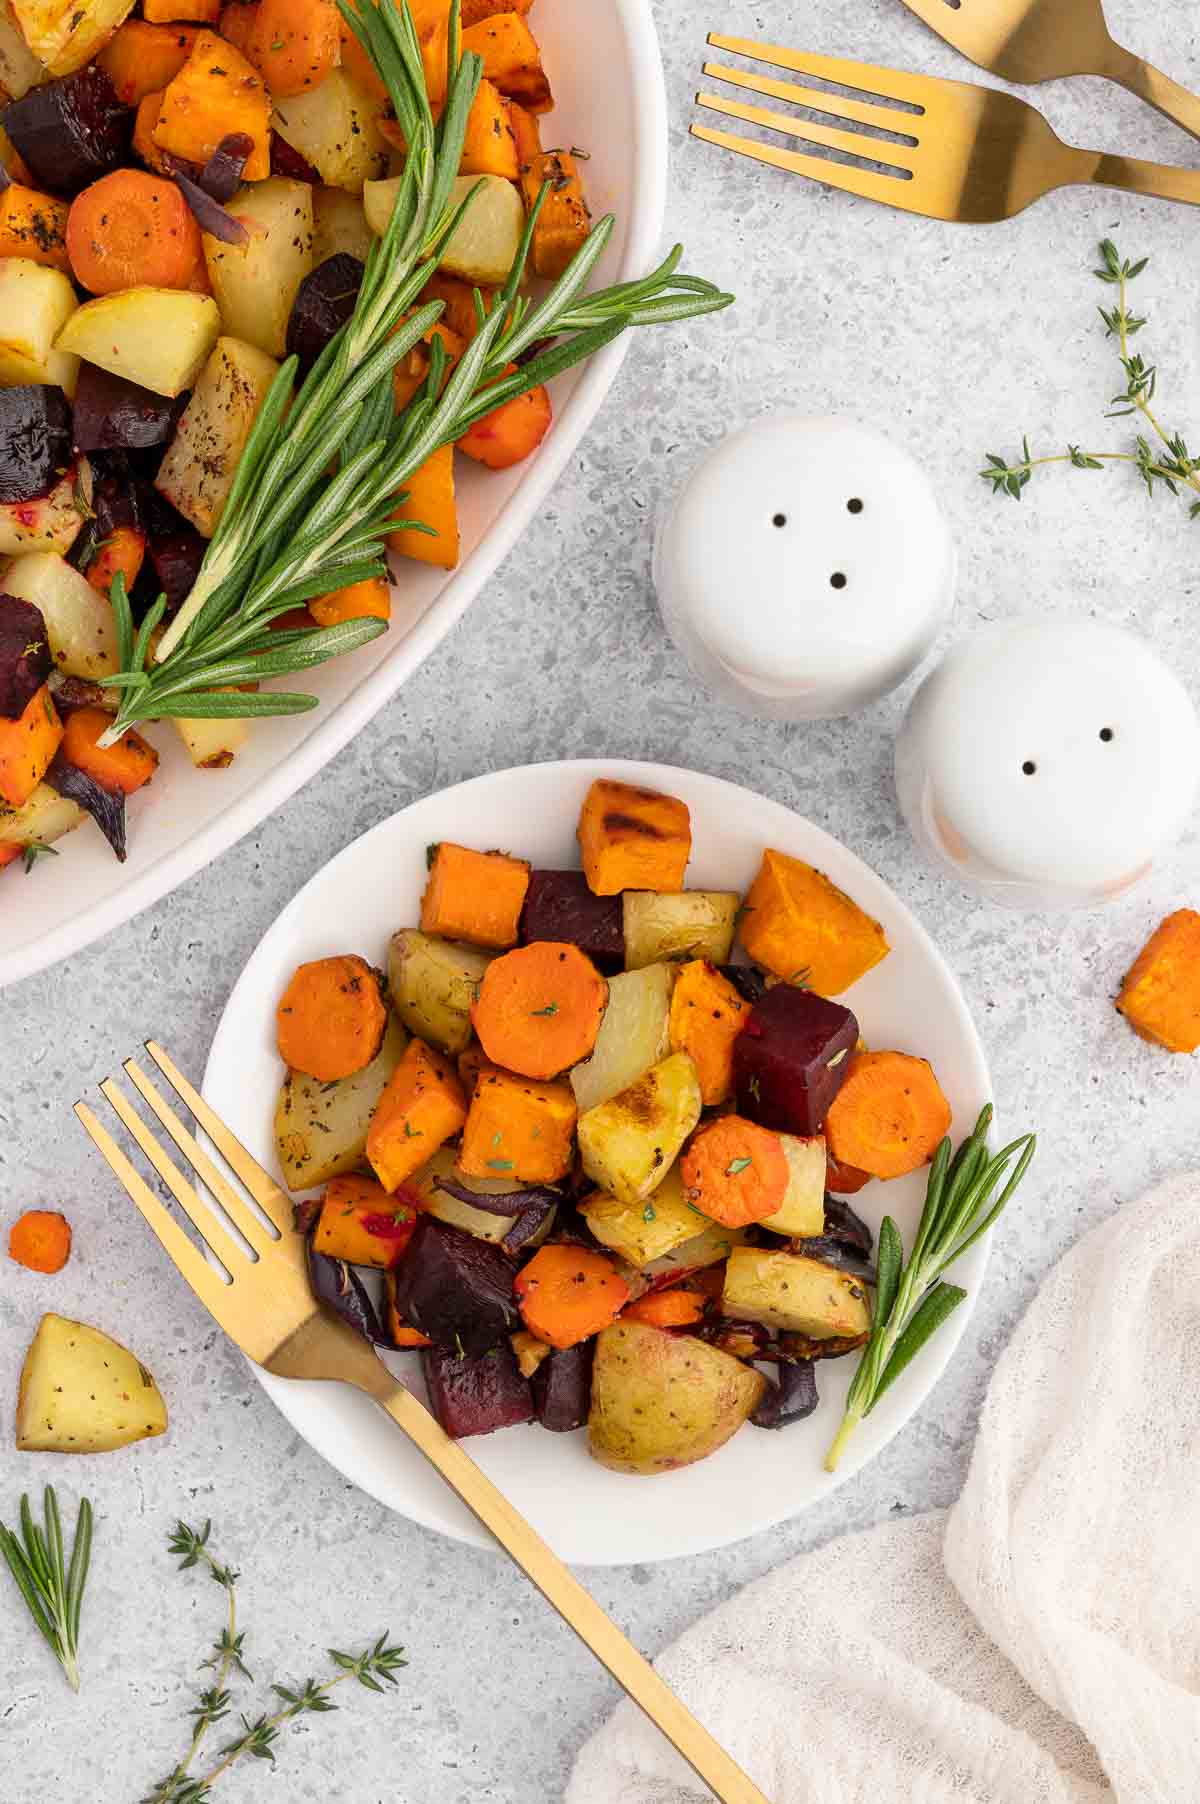 Roasted root vegetables in a serving bowl and smaller plate.